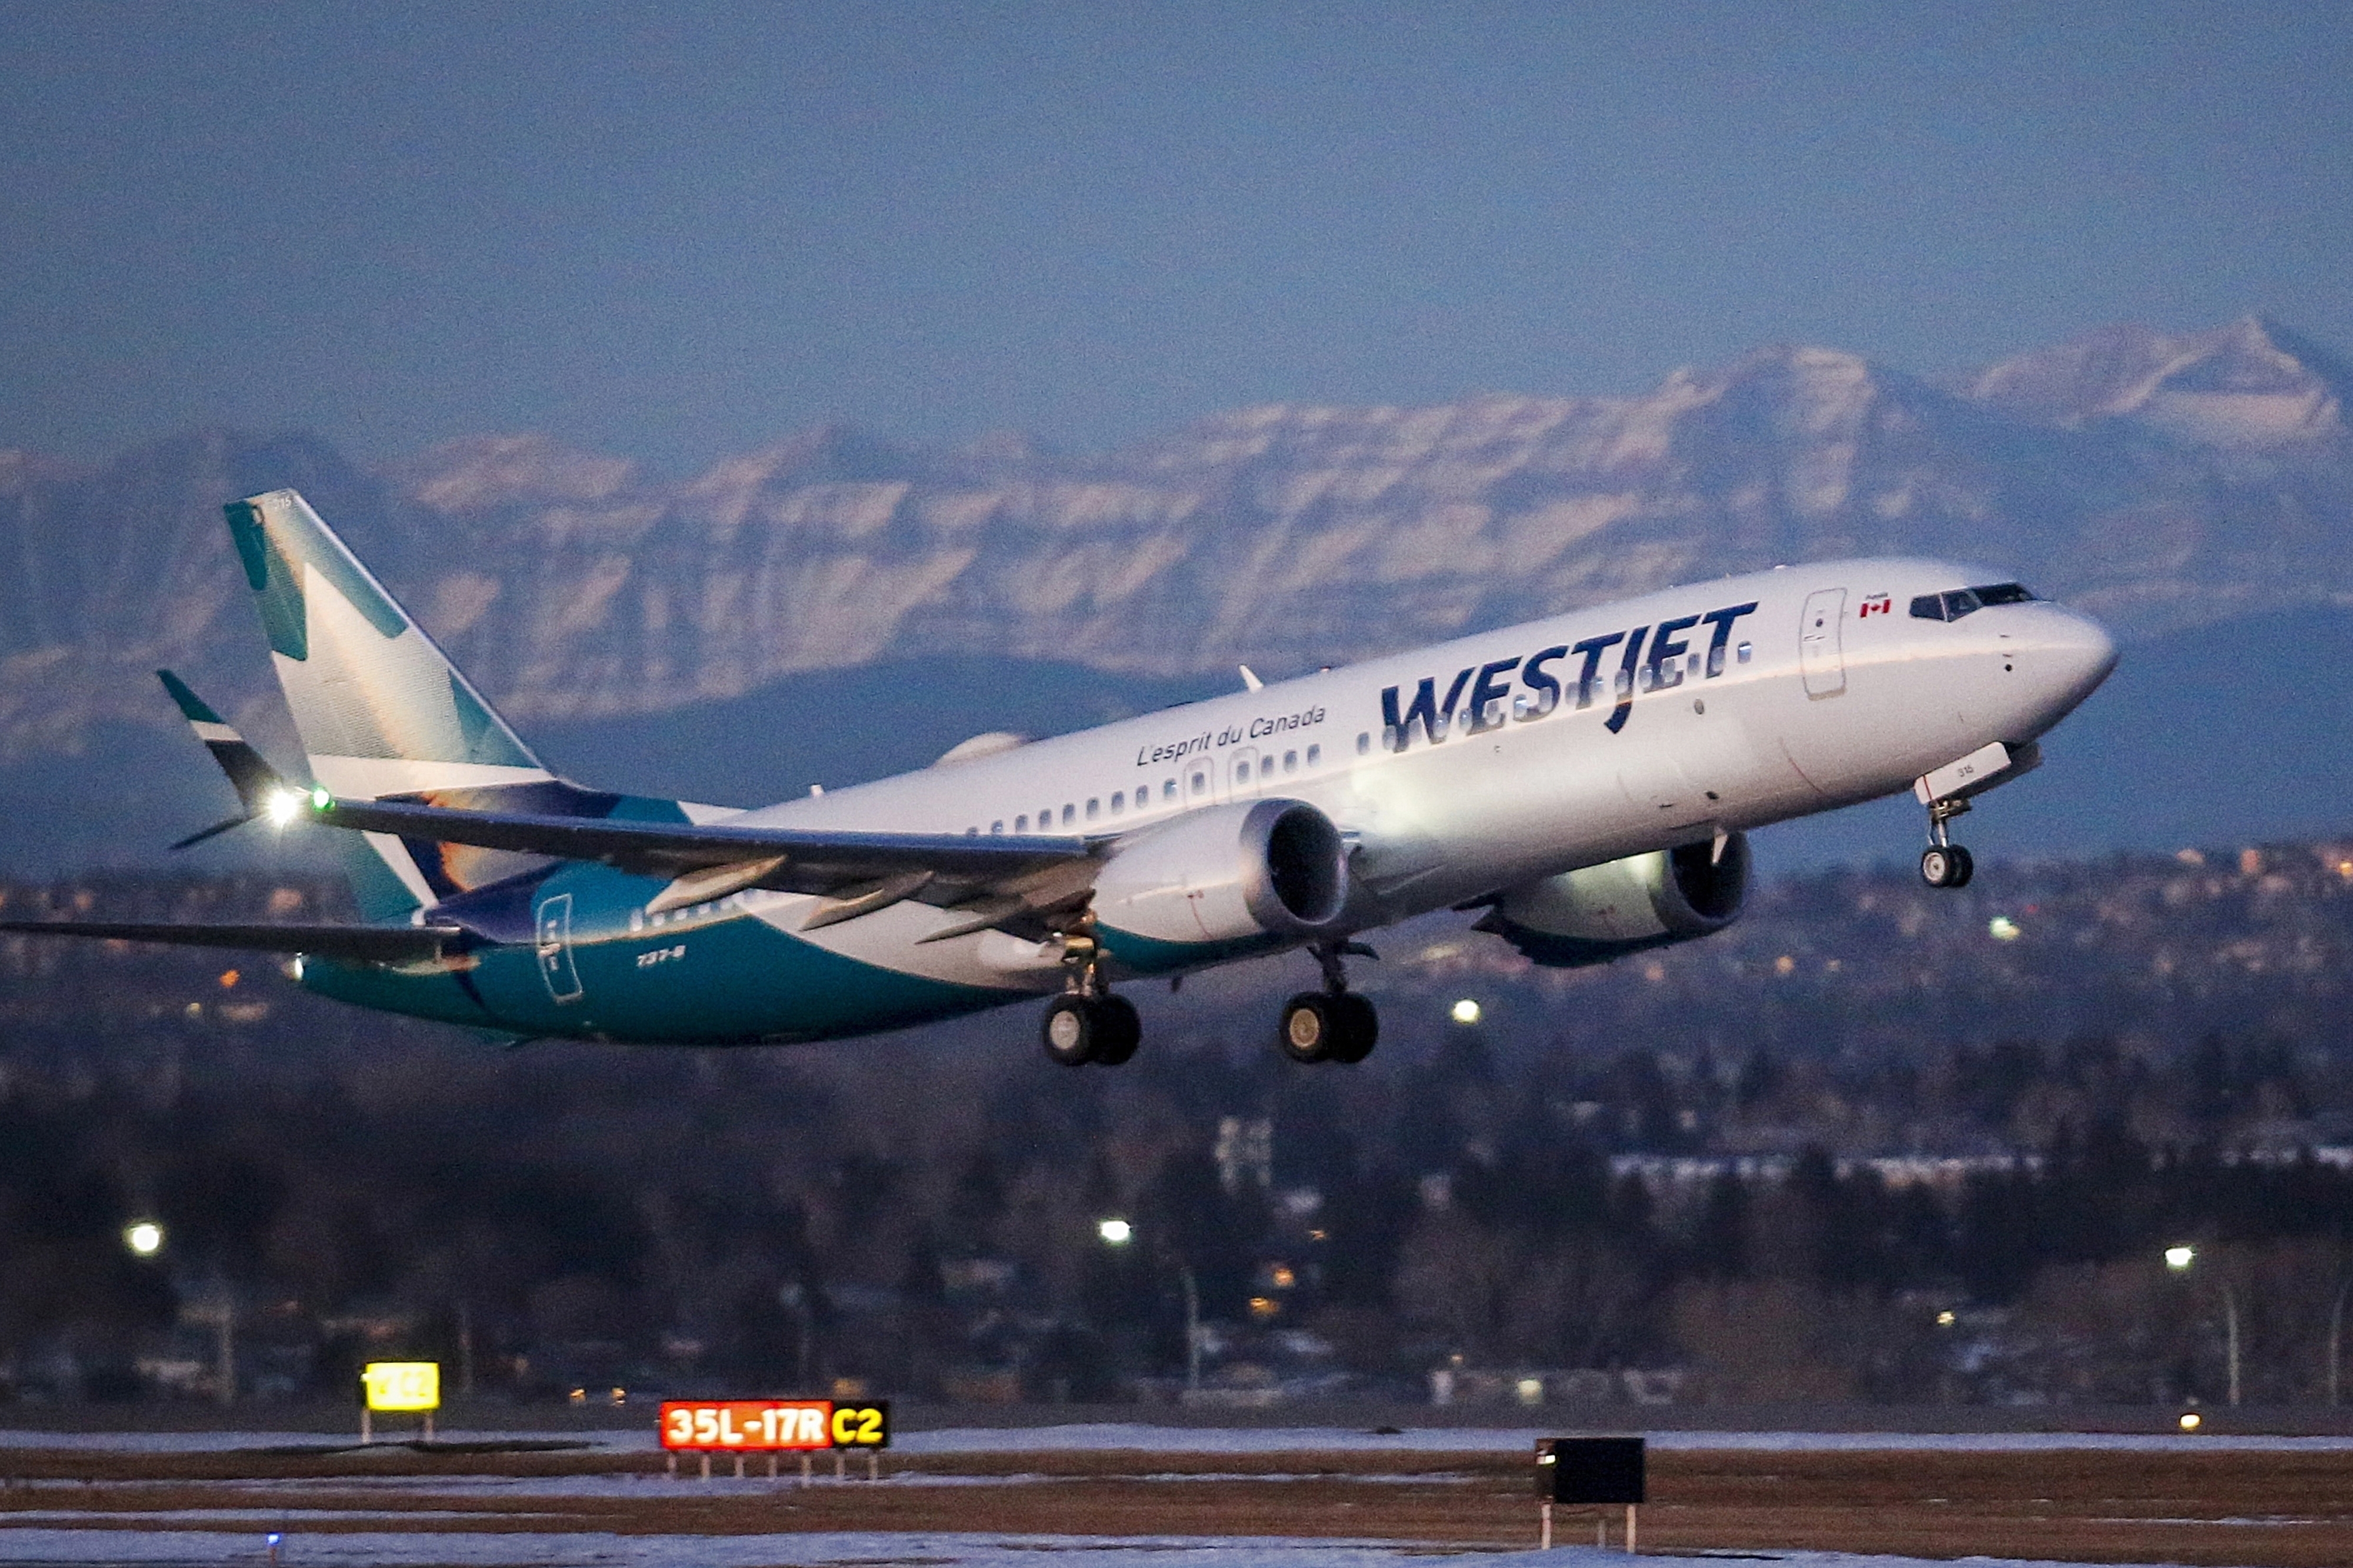 ARCHIVE - A WestJet plane took off from Calgary, Alberta, on Jan. 21, 2021. Mechanics at Canadian airline WestJet launched an offensive that resulted in the cancellation of 407 flights. (Jeff McIntosh/The Canadian Press via AP, Archive)